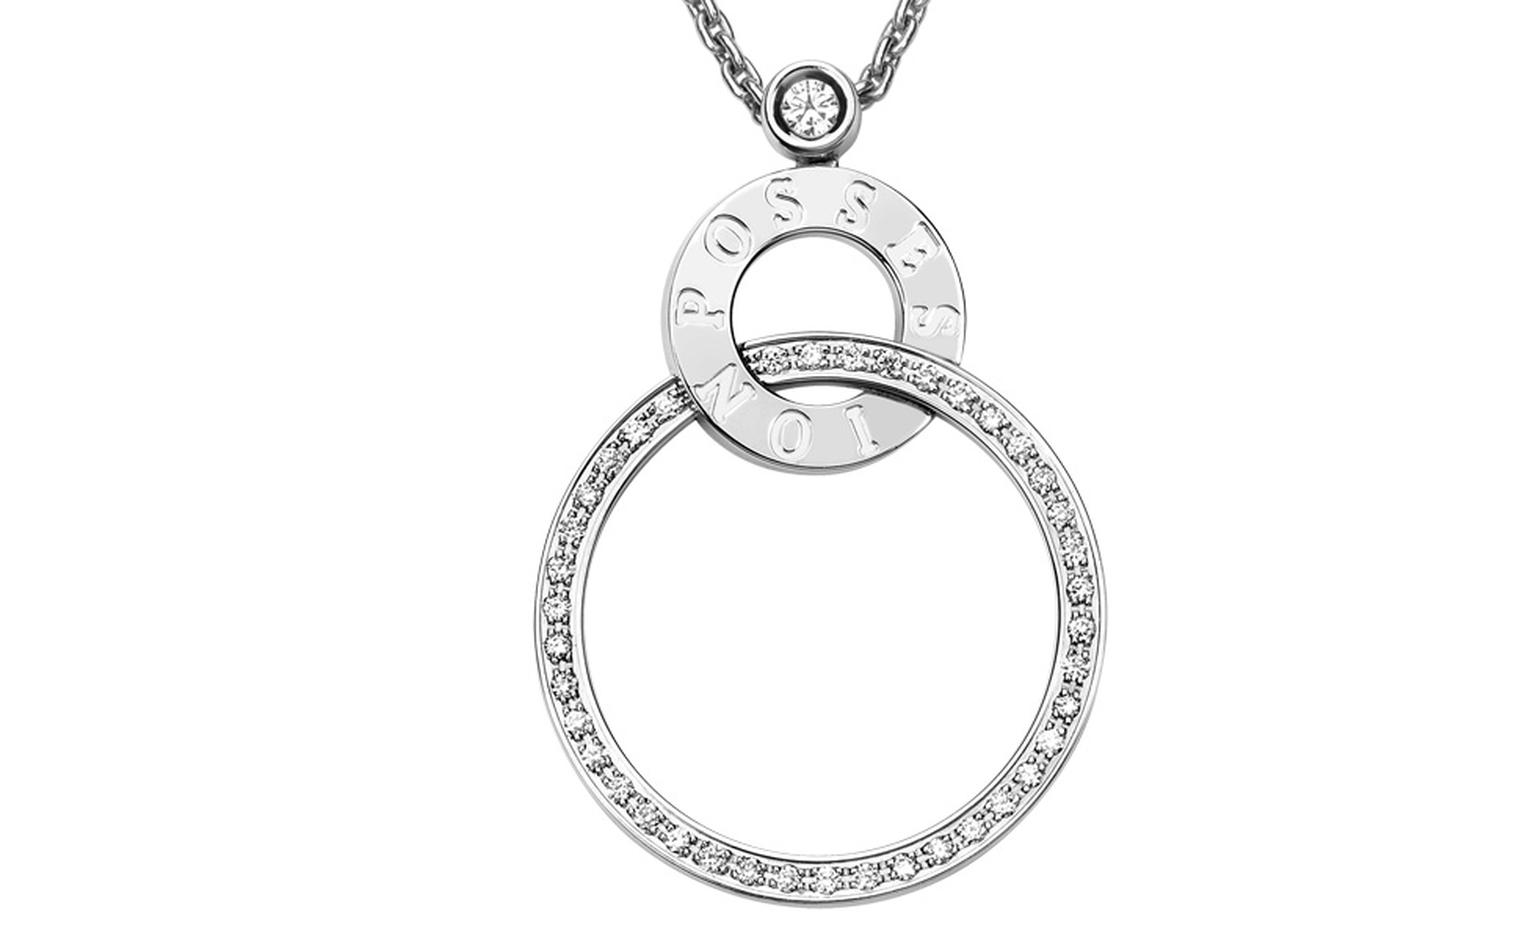 This Piaget Possession pendant is being offered as second prize for those who order a glass of Louis Roederer champagne at Cafe Luc in Marylebone, London over the Royal Wedding weekend.